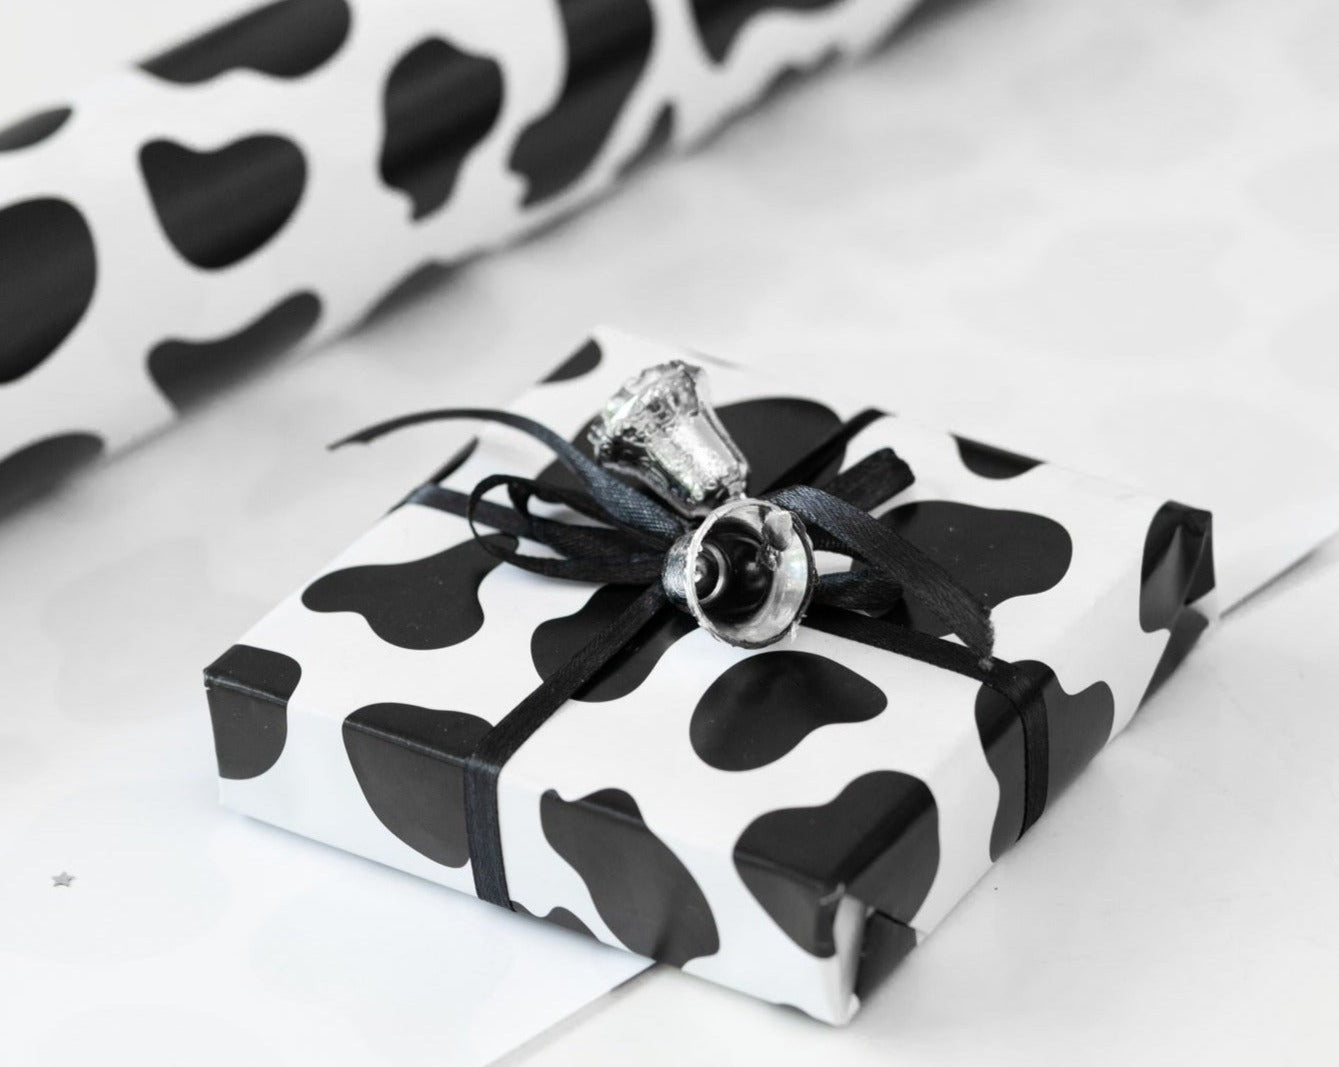 Black & White Cow Print Gift Wrap Unique Spotted Wrapping Paper